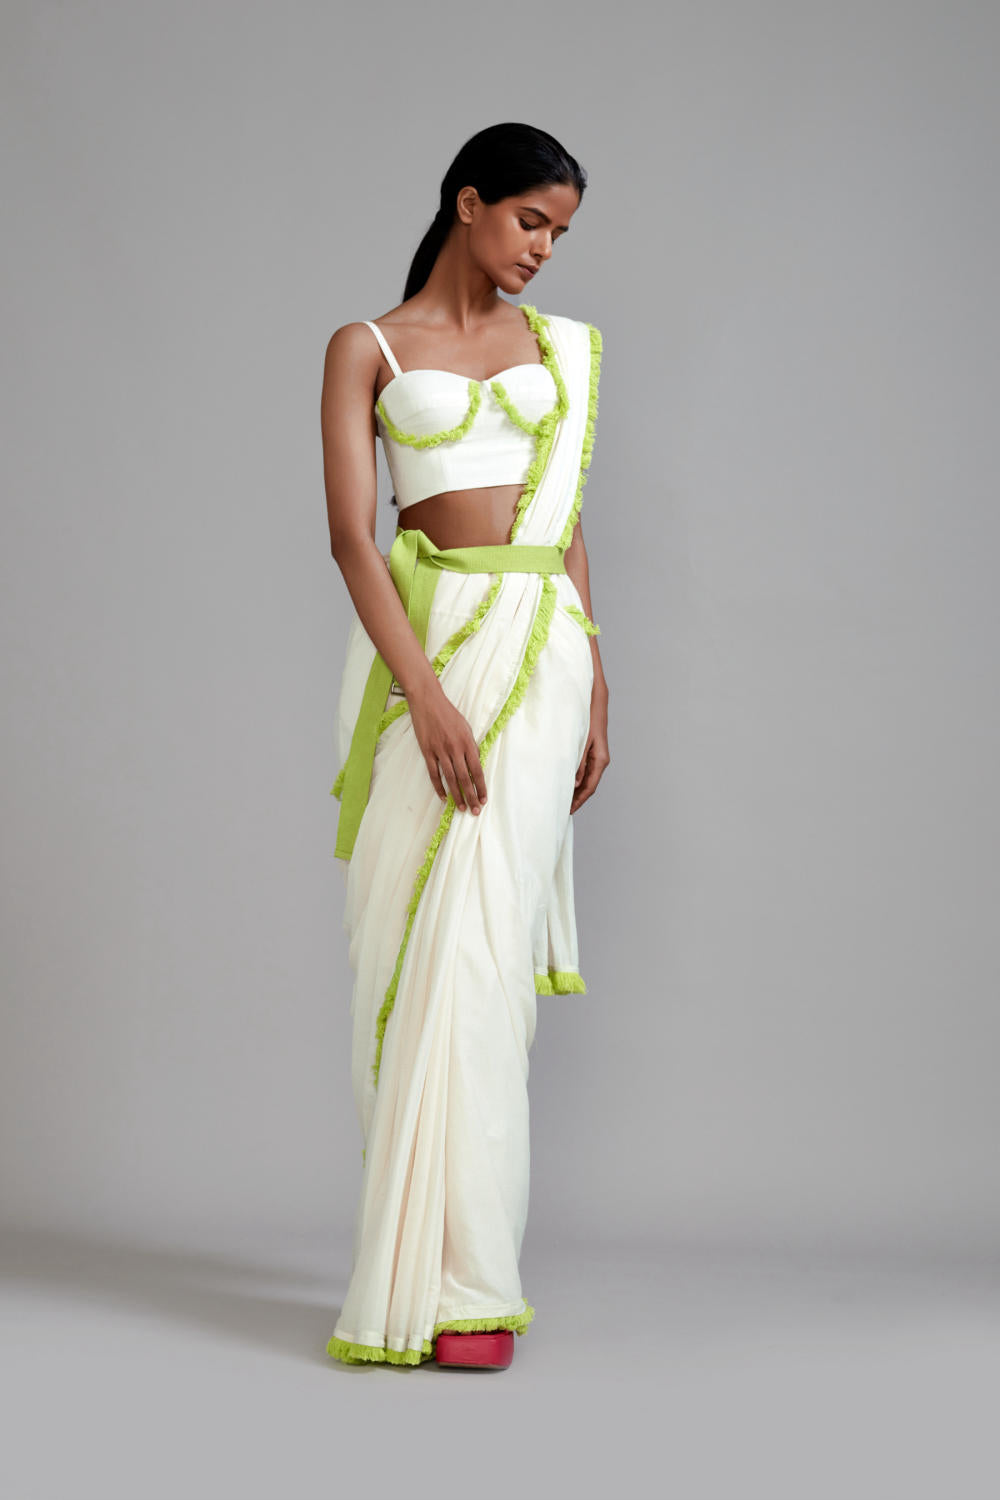 Off-White With Neon Green Saree & Fringed Corset Set (2 PCS)